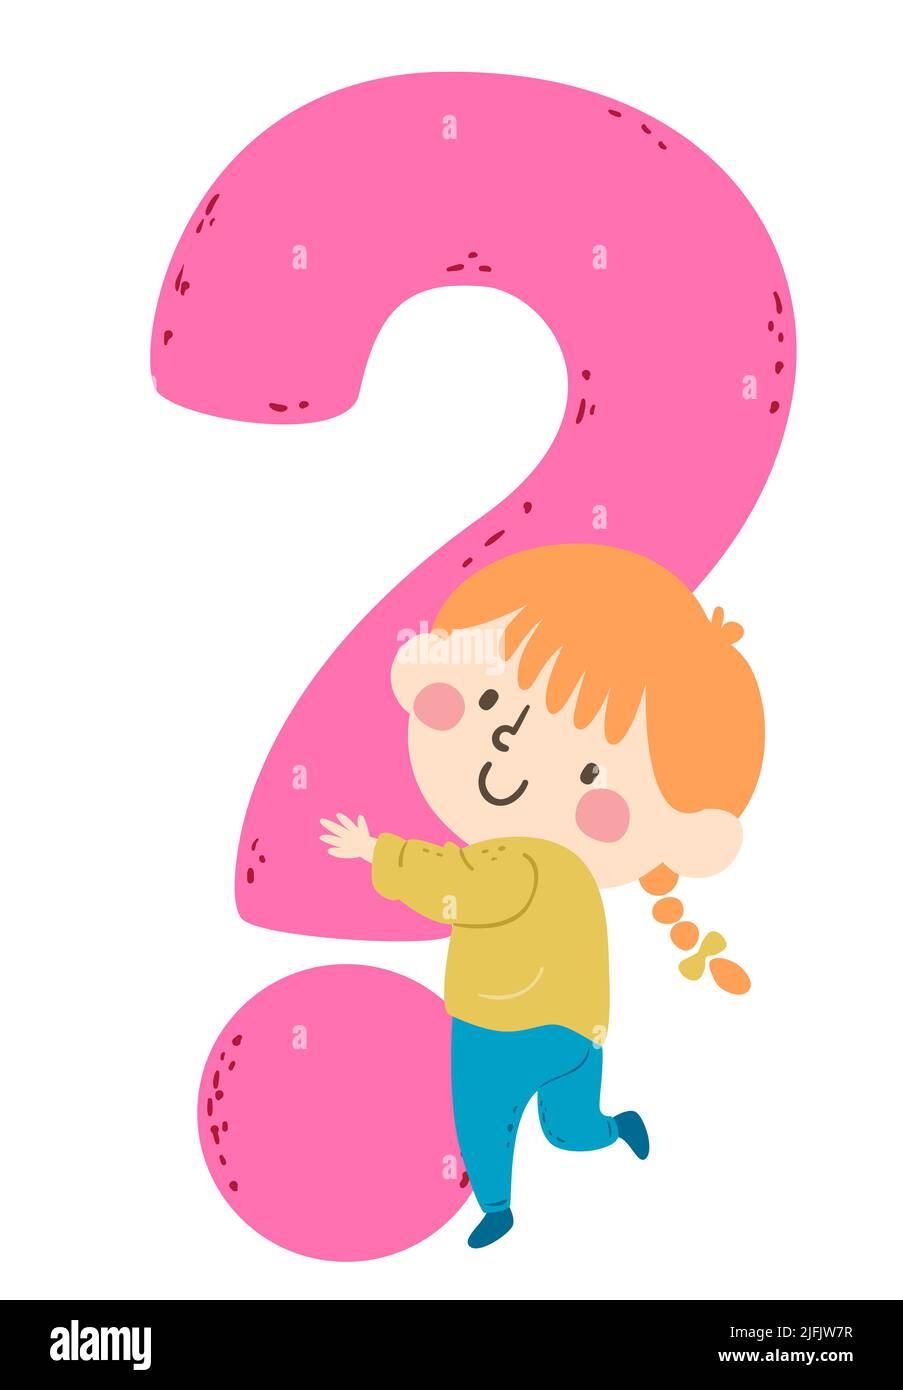 Illustration of Kid Girl Standing and Hugging a Big Question Mark Stock Photo